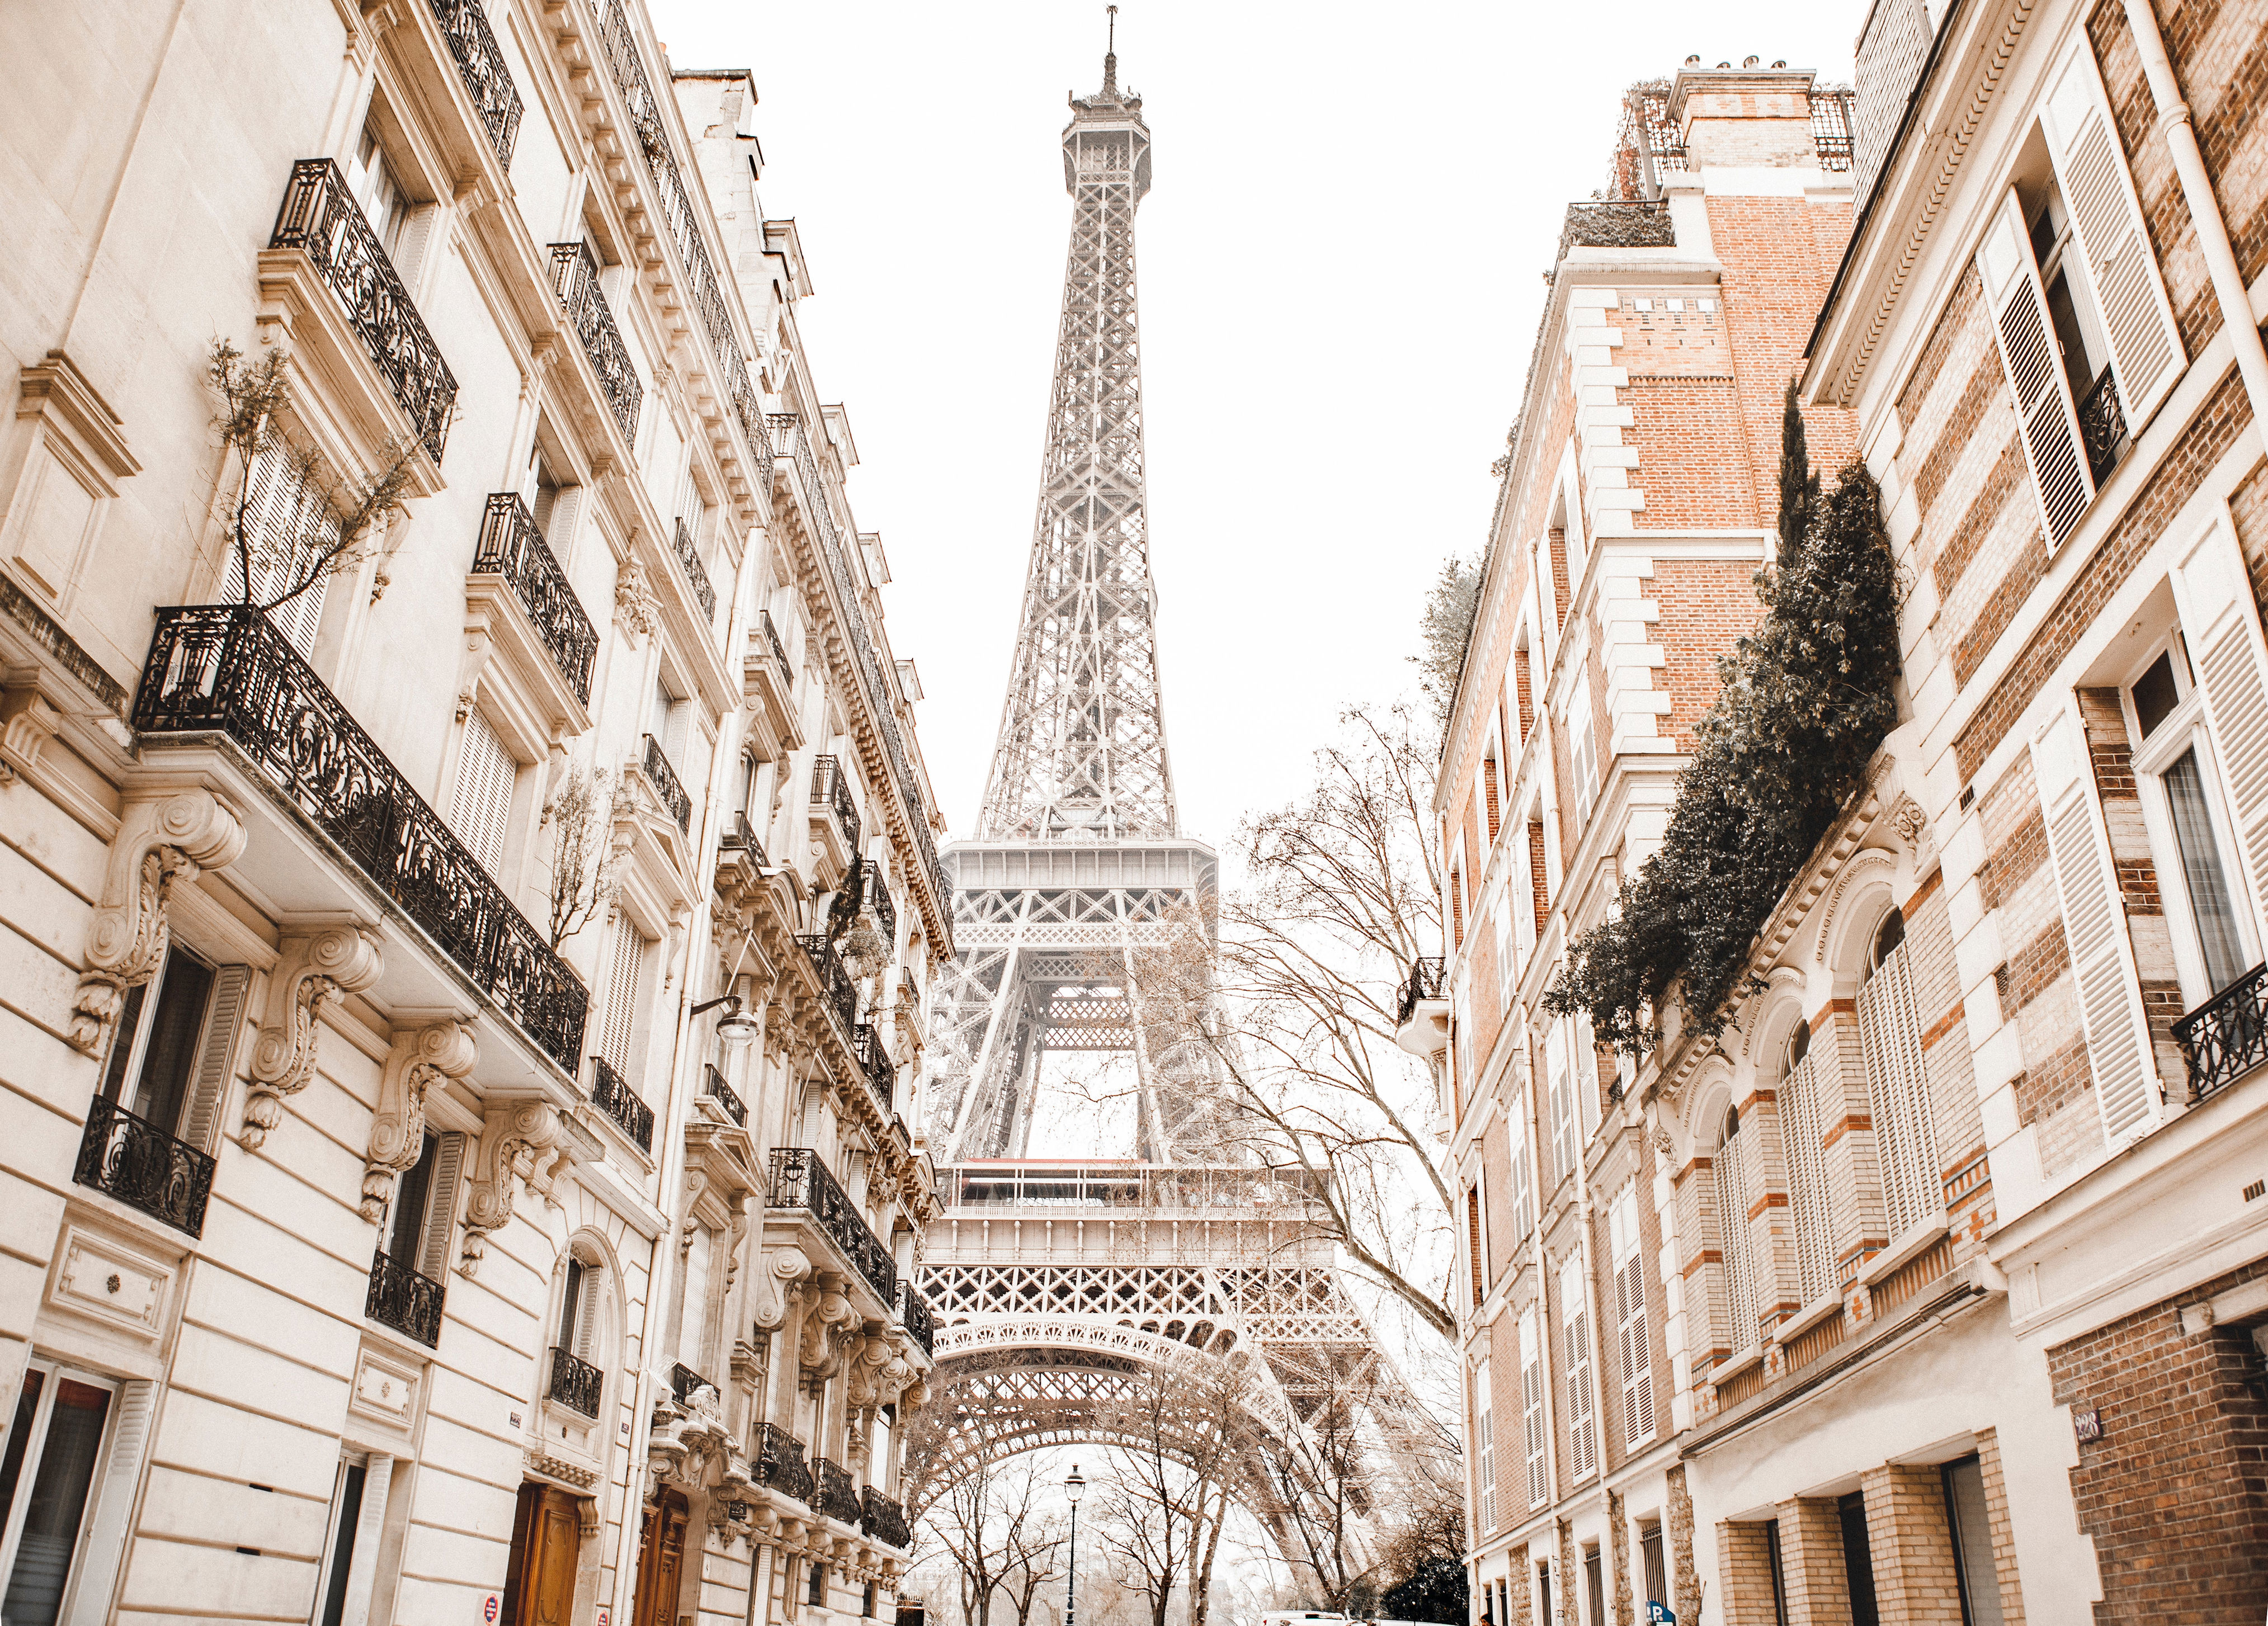 Whether it’s a Quinceañera or a Sweet 16 you’re celebrating, the coming-of-age birthday is a time of wonderment—and that’s exactly what you’ll find in the <a href="https://www.cntraveler.com/destinations/paris?mbid=synd_msn_rss&utm_source=msn&utm_medium=syndication">French capital</a>. A city-based getaway is the right primer for a proper <a href="https://www.cntraveler.com/galleries/2015-04-03/50-things-to-do-in-europe-before-you-die-germany-italy-france-greece?mbid=synd_msn_rss&utm_source=msn&utm_medium=syndication">European vacation</a>, giving teens the opportunity to navigate a <a href="https://www.cntraveler.com/gallery/our-favorite-foreign-language-films-and-where-to-watch-them?mbid=synd_msn_rss&utm_source=msn&utm_medium=syndication">foreign-language</a> environment while gaining critical cultural perspective. Give them a taste of travel planning by letting them stitch together a custom itinerary through <a href="https://www.getyourguide.com/">GetYourGuide</a>: They can choose from a <a href="https://www.getyourguide.com/activity/paris-l16/paris-skip-the-line-arc-de-triomphe-tickets-t66157?preview=24RUML2CGTCO8UQ4OHFQHCXD79Z9W26R&utm_force=0">rooftop tour of the Arc de Triomphe</a>, <a href="https://www.getyourguide.com/paris-l16/teen-shopping-fashion-accessories-tour-in-paris-t42345/">teen-centered shopping tour</a>, <a href="https://www.getyourguide.com/paris-l16/bake-french-macaroons-with-chef-marthe-t11890/">macaron-baking class</a>, and more. If that doesn’t fill the hours, consider a <a href="https://thatmuse.com/louvre/">Louvre treasure hunt</a> with ThatMuse and an evening stroll through Montmartre’s Place Dalida. (As any <a href="https://www.cntraveler.com/story/where-was-emily-in-paris-filmed?mbid=synd_msn_rss&utm_source=msn&utm_medium=syndication"><em>Emily in Paris</em></a> fan knows, pics or it didn’t happen.)<p>Sign up to receive the latest news, expert tips, and inspiration on all things travel.</p><a href="https://www.cntraveler.com/newsletter/the-daily?sourceCode=msnsend">Inspire Me</a>